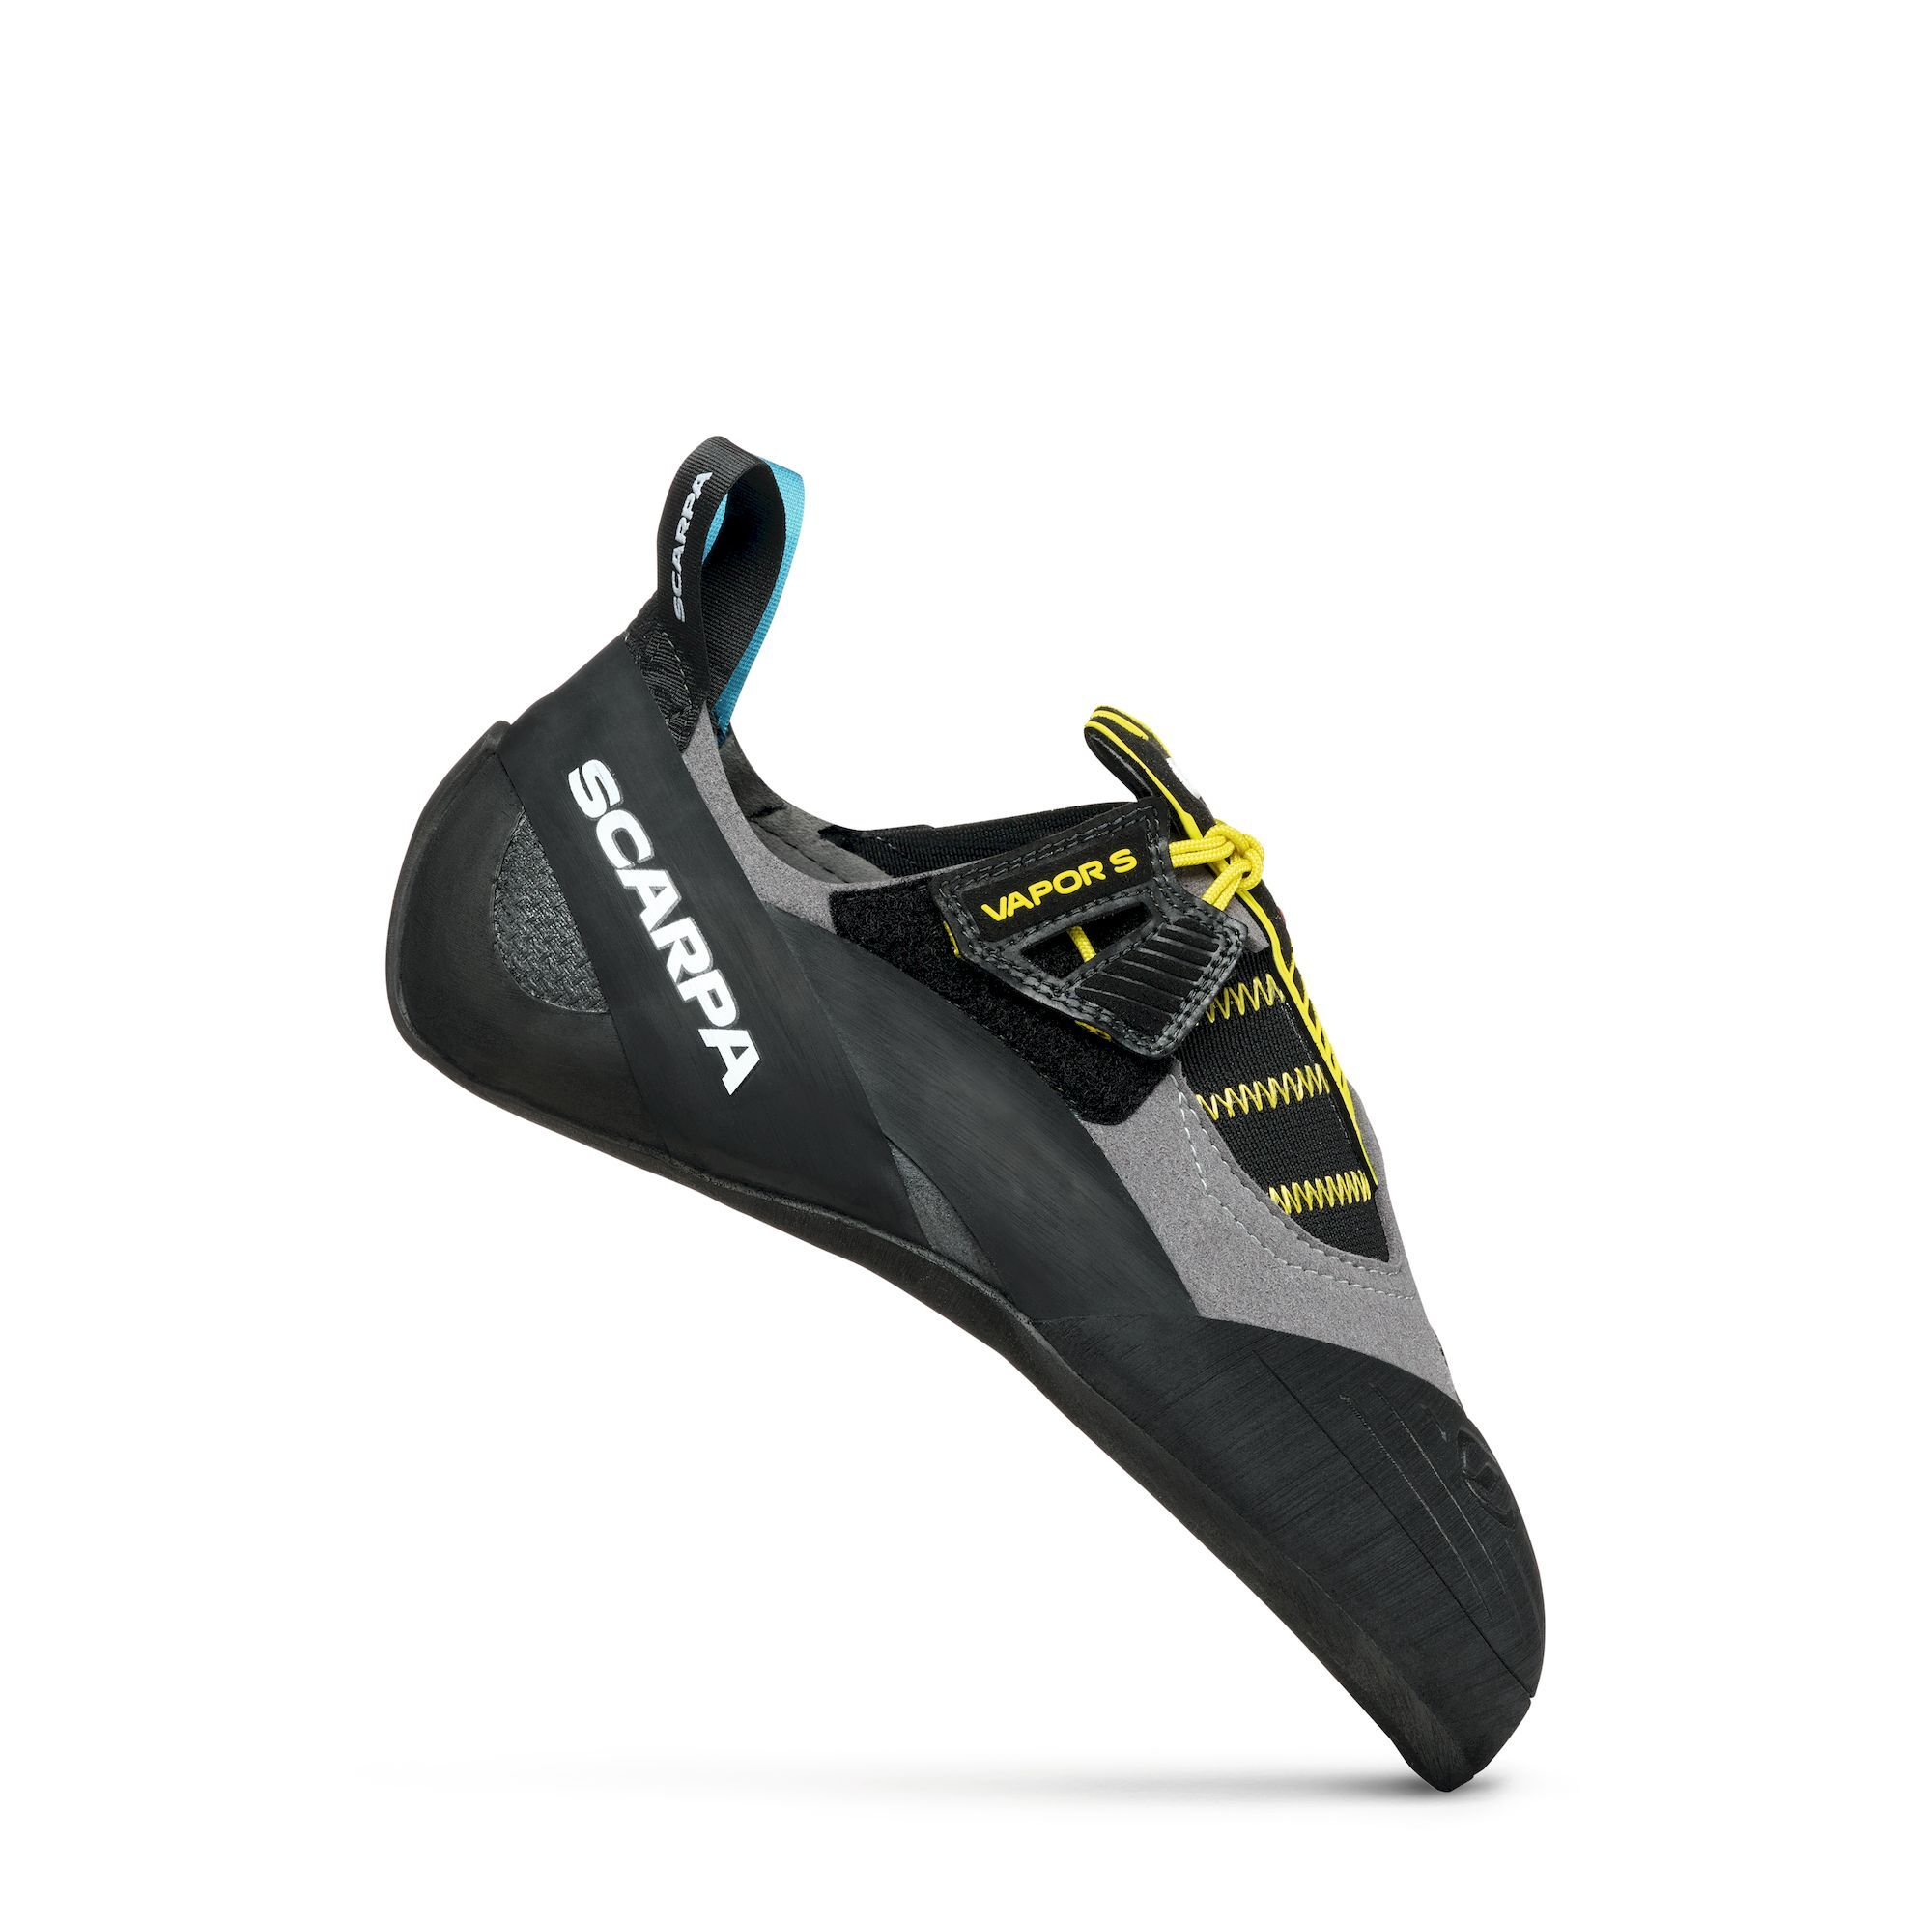 Scarpa Vapor S - Chaussons escalade homme | Hardloop